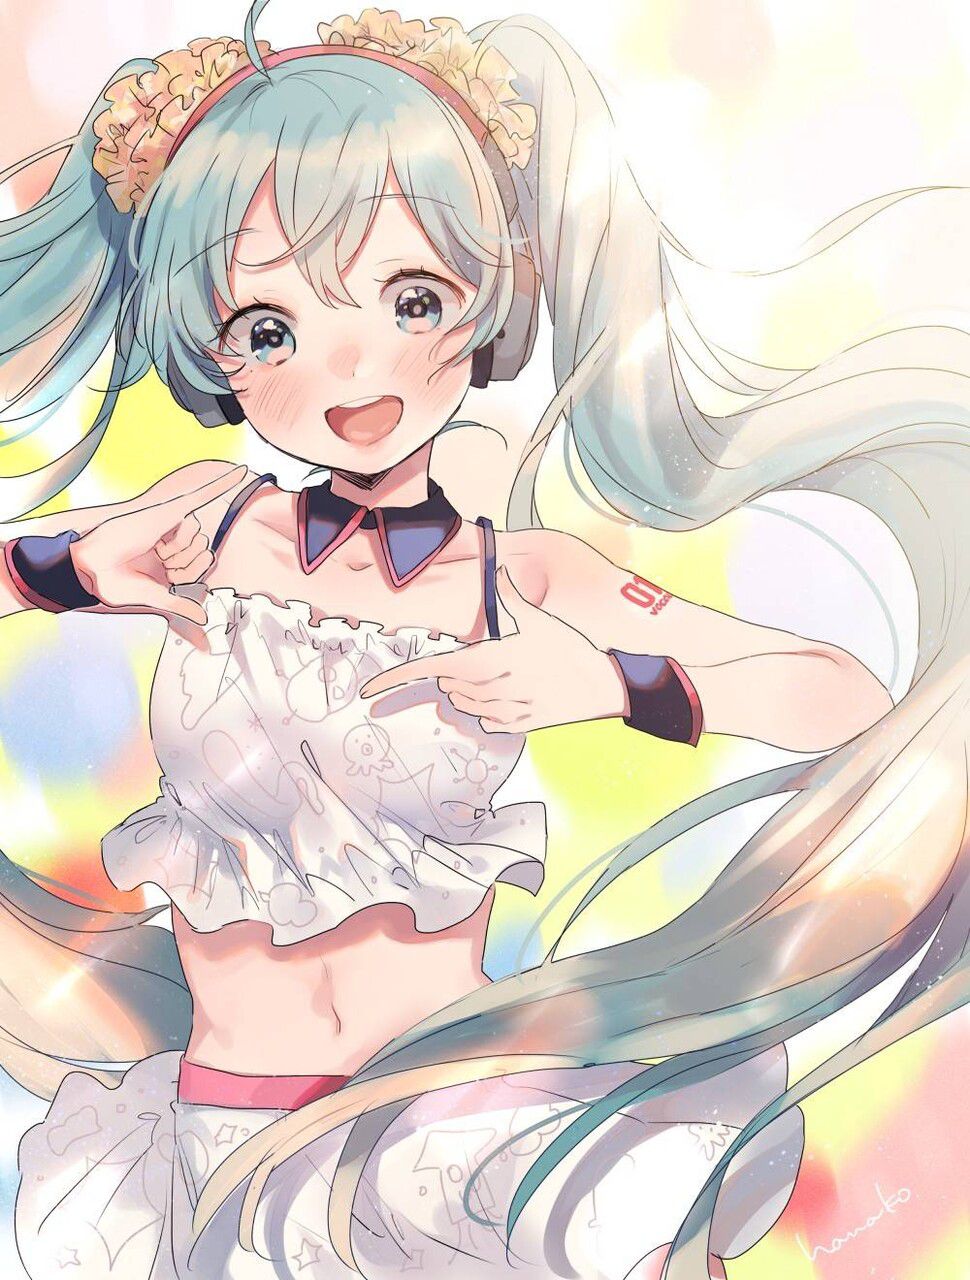 【Erotic image】Character image of Hatsune Miku who wants to refer to the erotic cosplay of vocalist 9